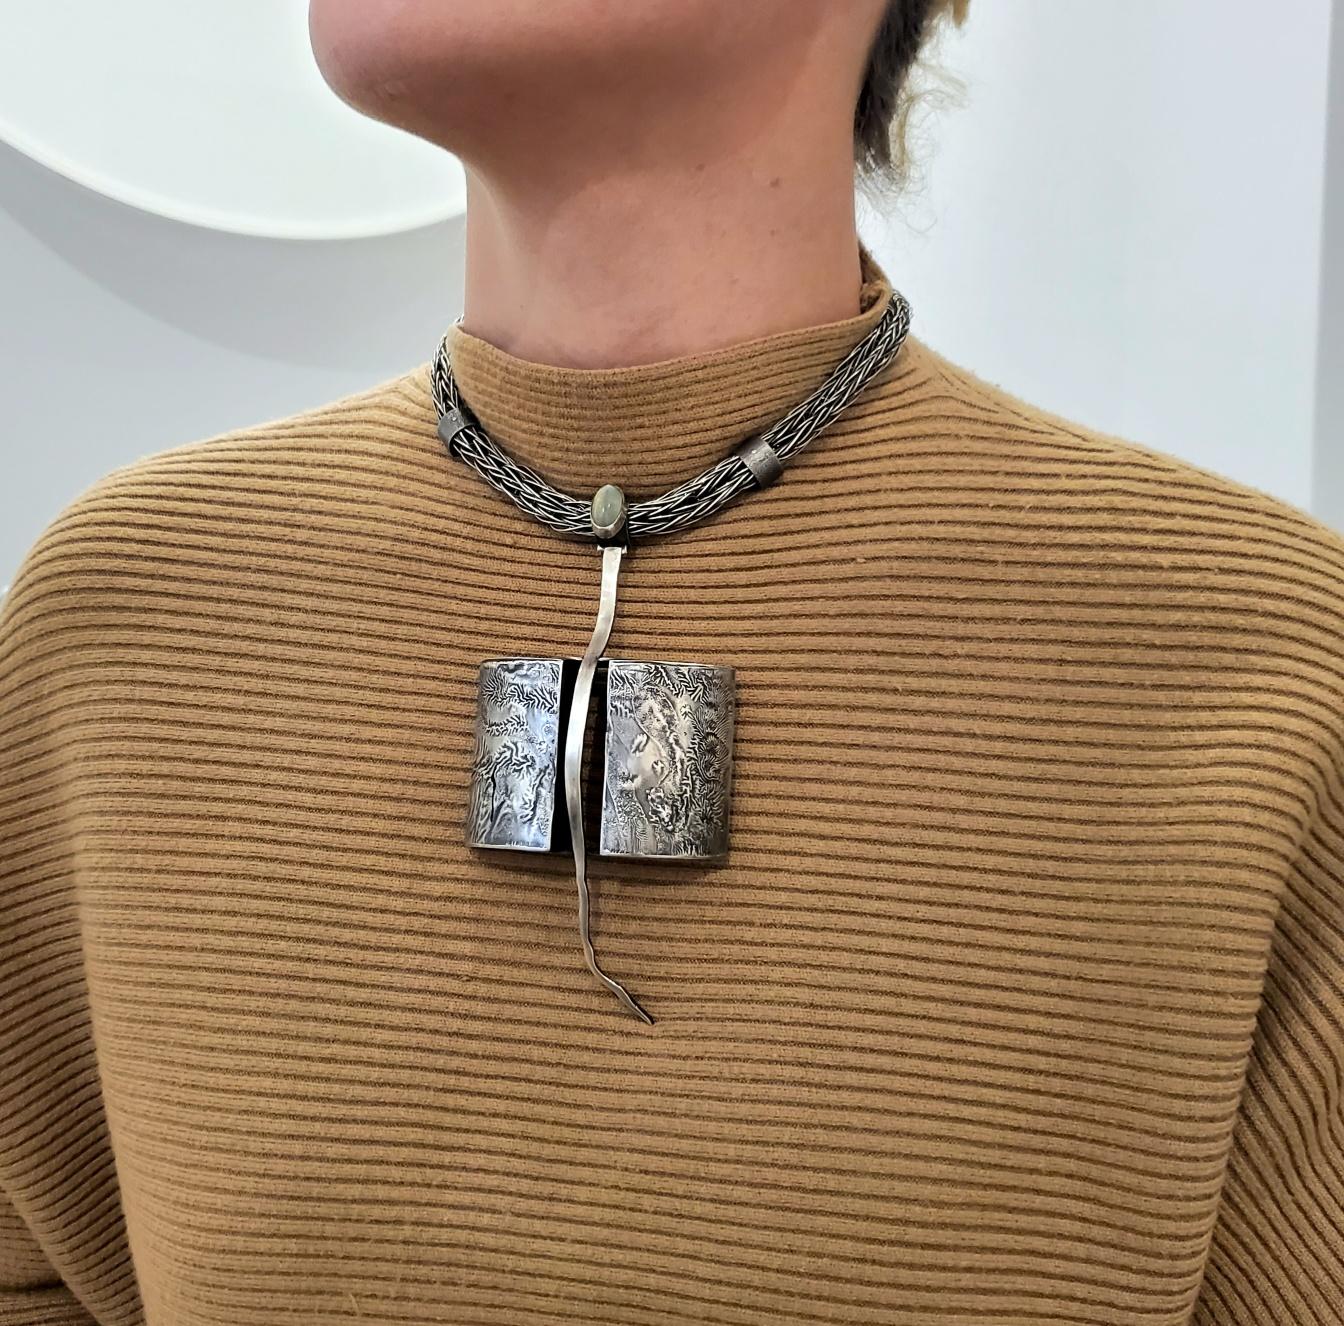 Artistic necklace designed by Rena Koopman (1945-).

An impressive bold sculptural piece, created by the American artist and goldsmith Rena Beatrice Koopman, back in the 1978. This necklace is an early work from her studio and a one-of-a-kind piece,